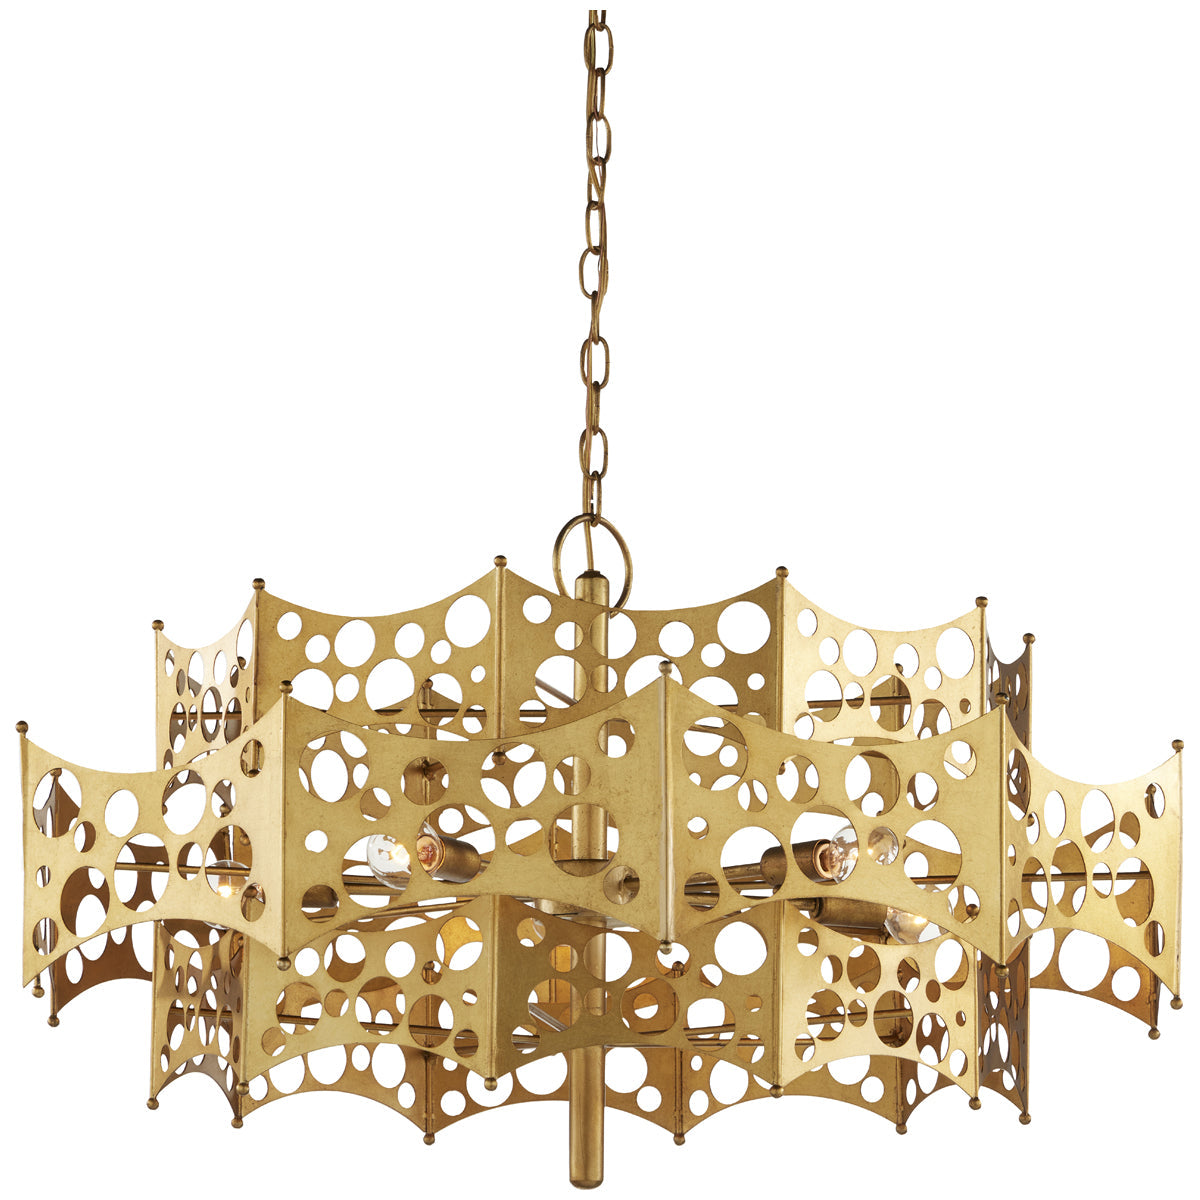 Currey and Company Emmental Chandelier